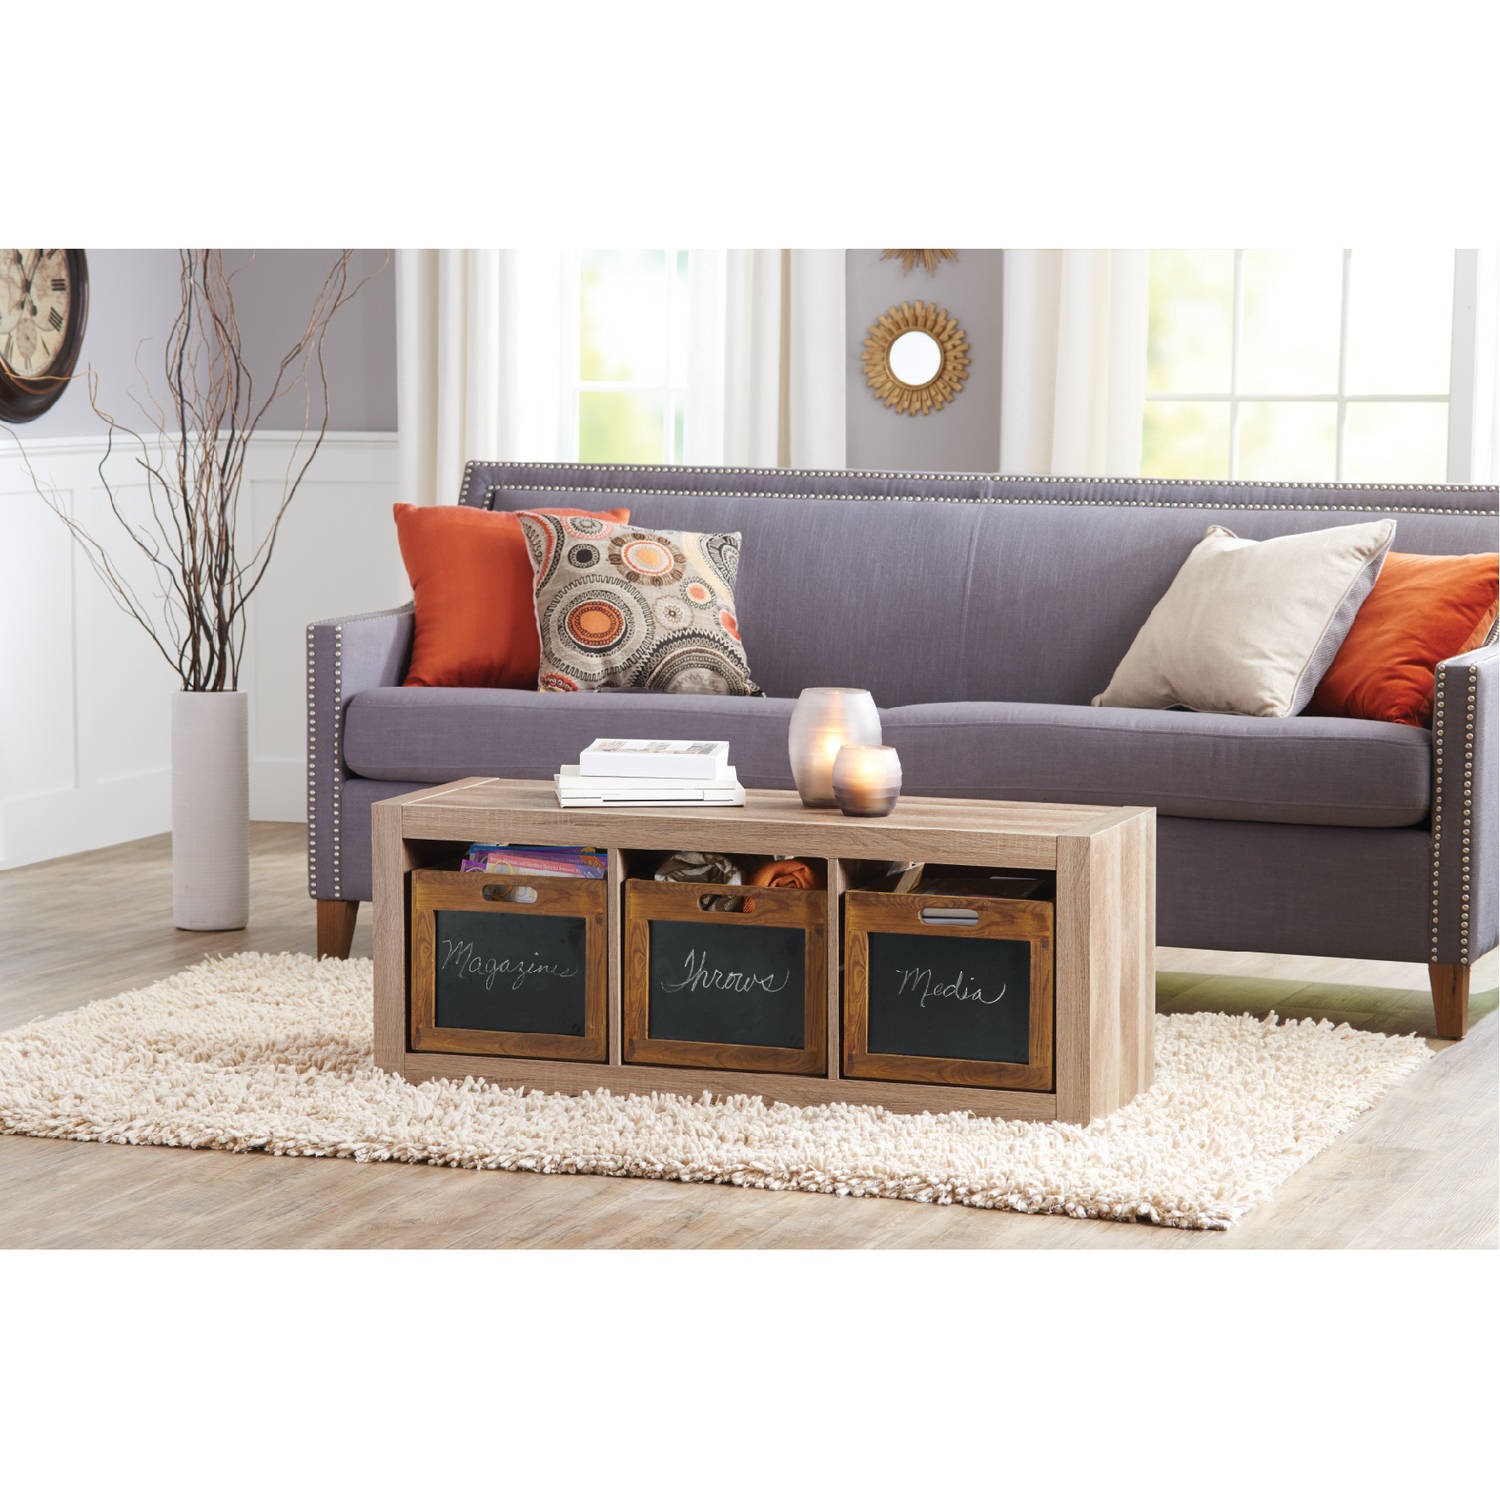 Better Homes and Gardens Wood Decor Crate - image 1 of 3